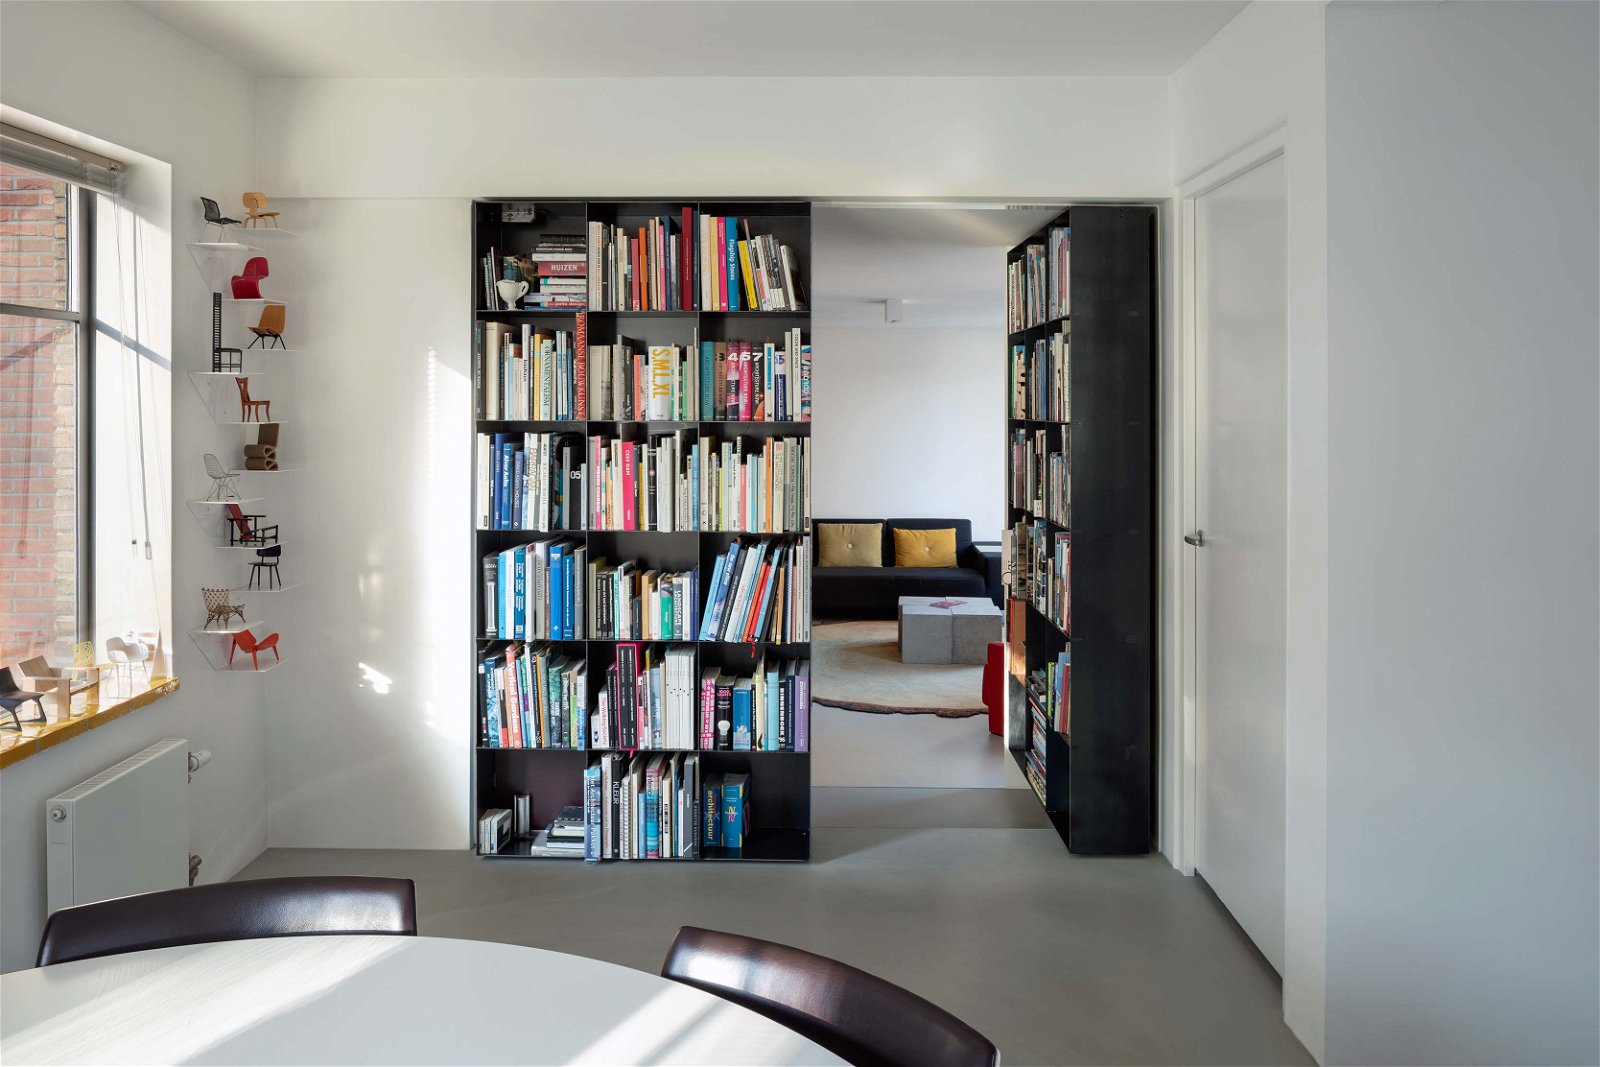 Pivoting bookcases with FritsJurgens System M pivot hinges